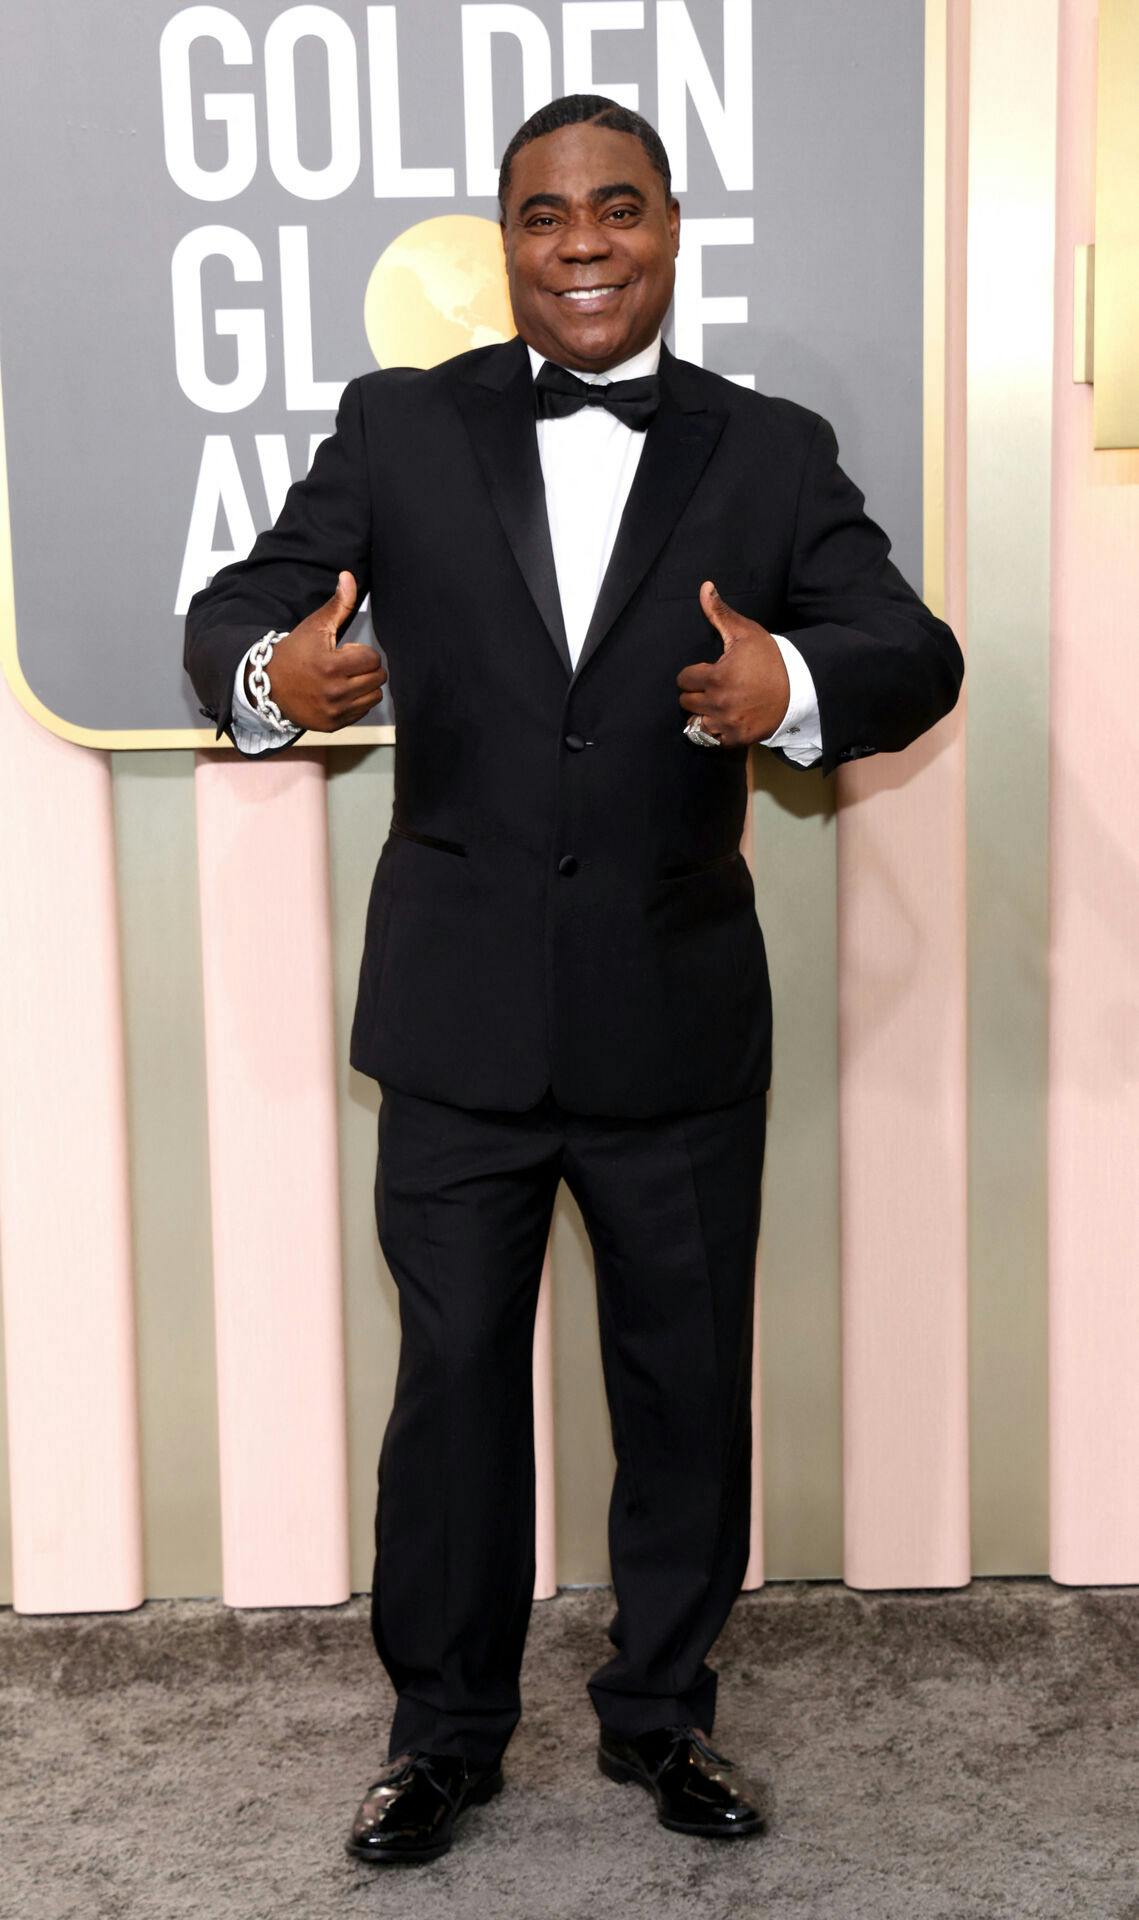 Tracy Morgan attends the 80th Annual Golden Globe Awards in Beverly Hills, California, U.S., January 10, 2023. REUTERS/Mario Anzuoni